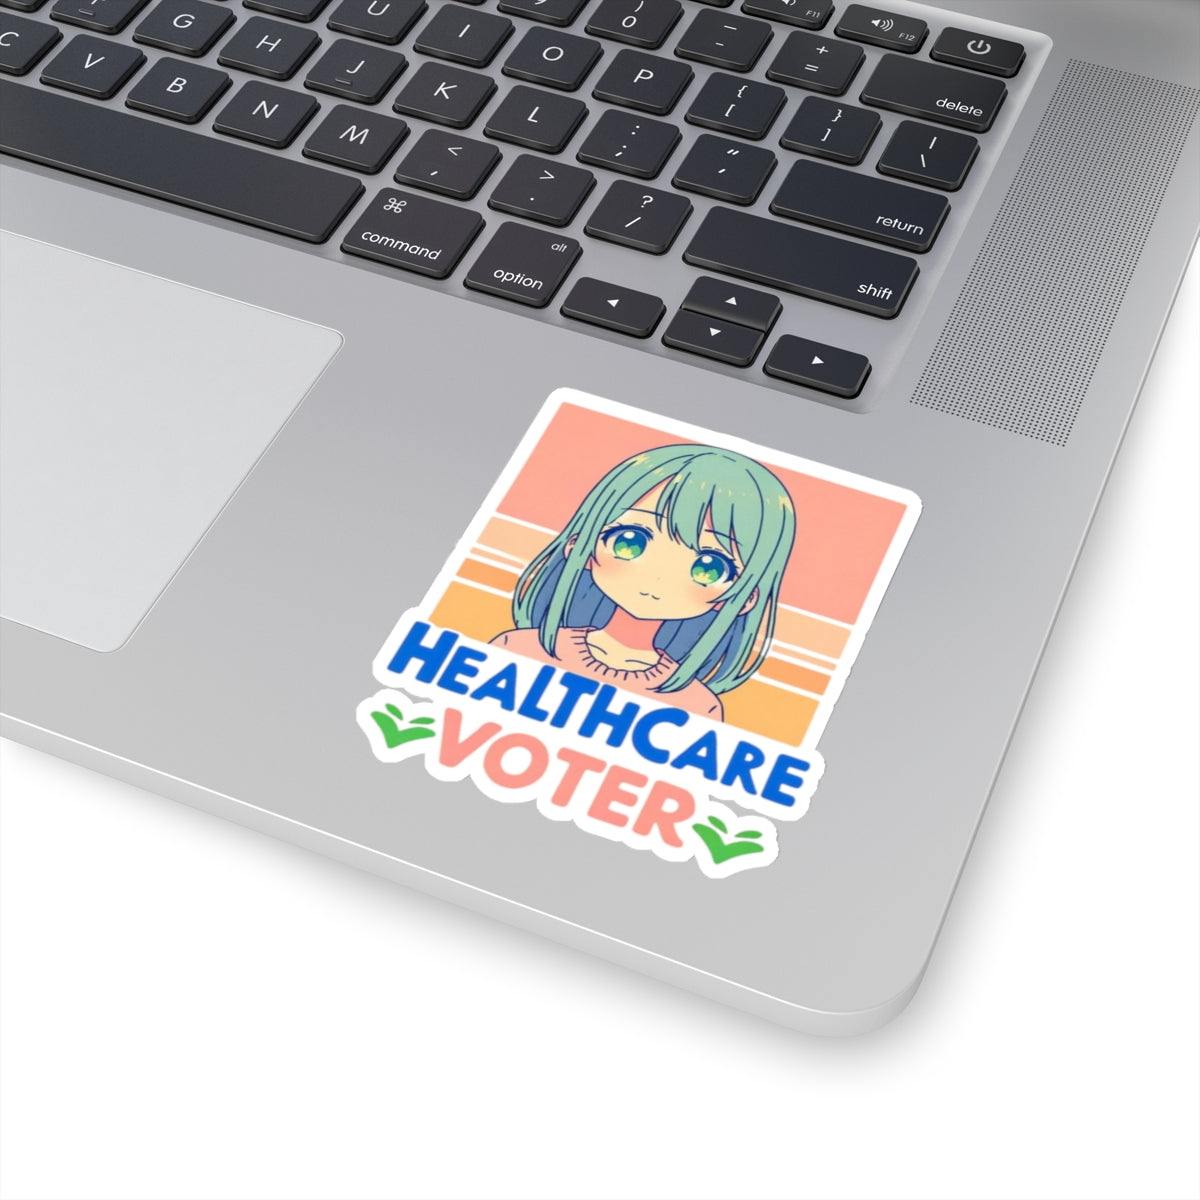 Inspirational Statement Sticker Showing You Care!  Healthcare Voter!